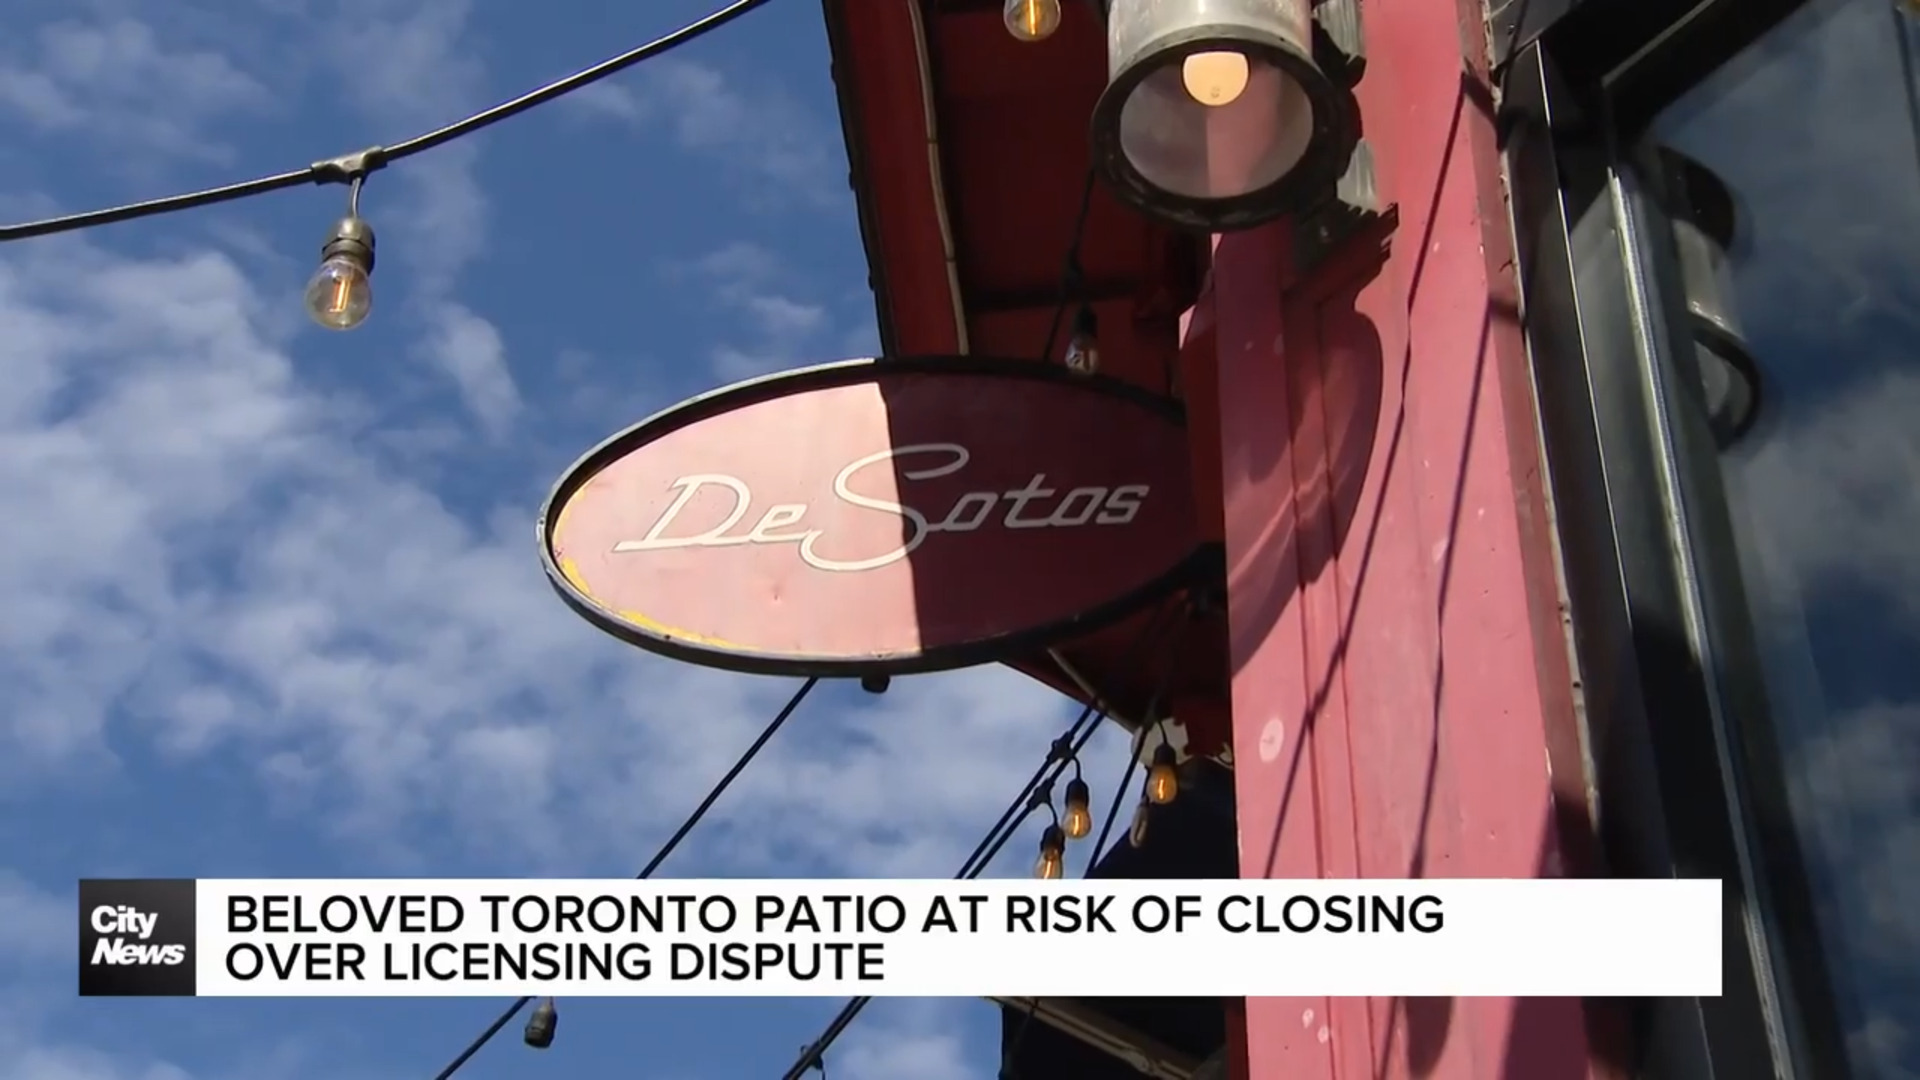 Beloved Toronto patio at risk of closing over licensing dispute